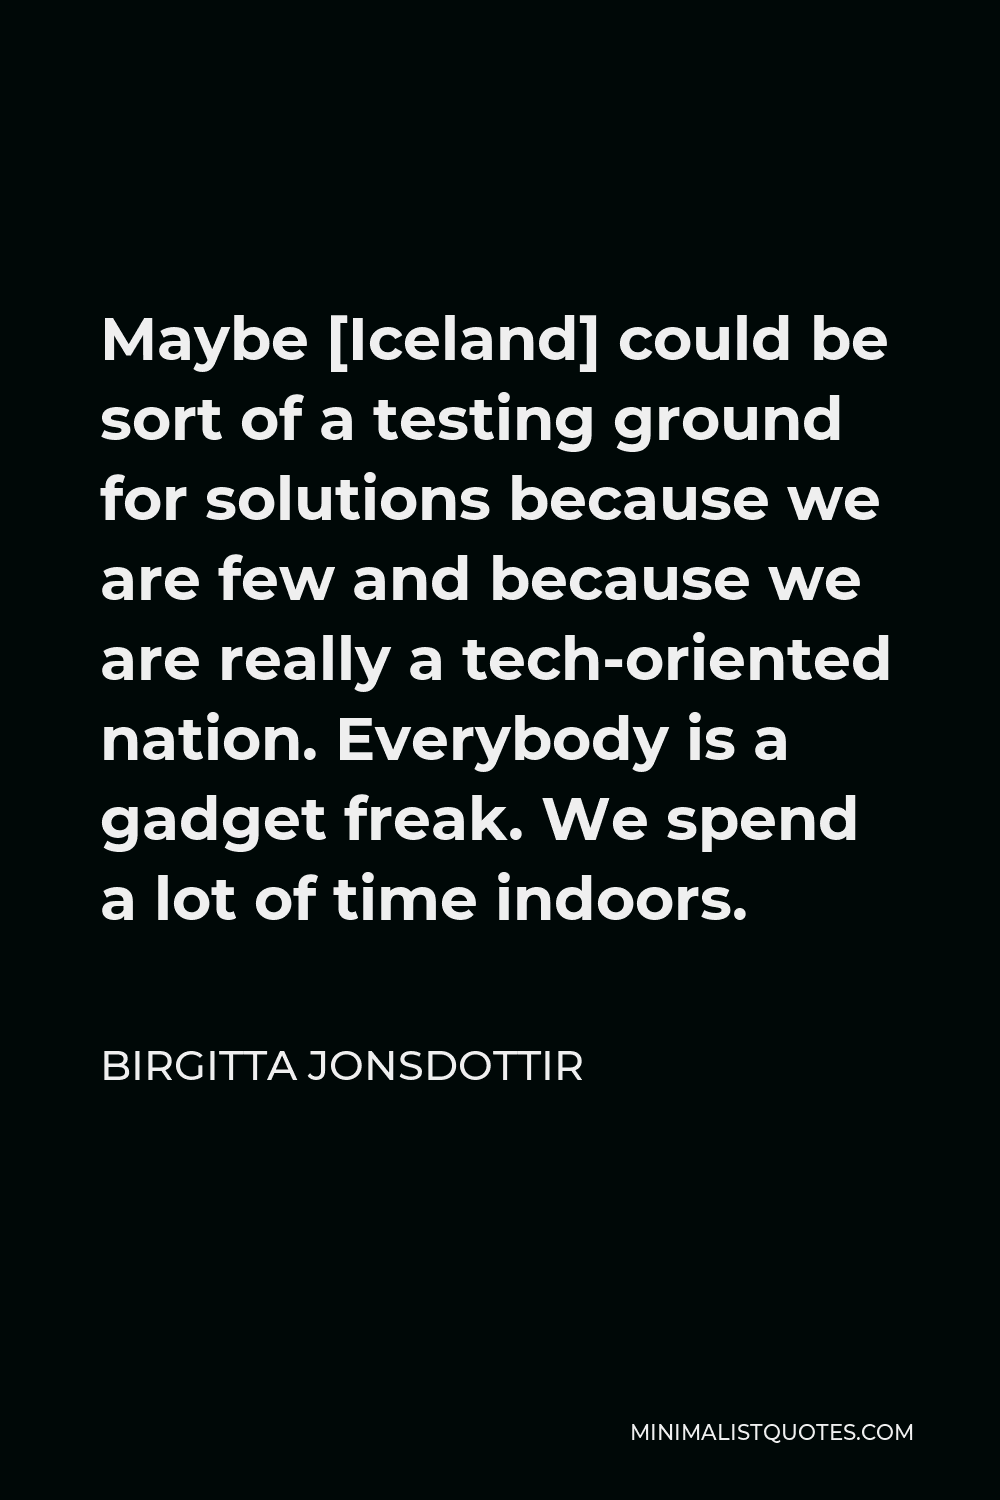 Birgitta Jonsdottir Quote - Maybe [Iceland] could be sort of a testing ground for solutions because we are few and because we are really a tech-oriented nation. Everybody is a gadget freak. We spend a lot of time indoors.